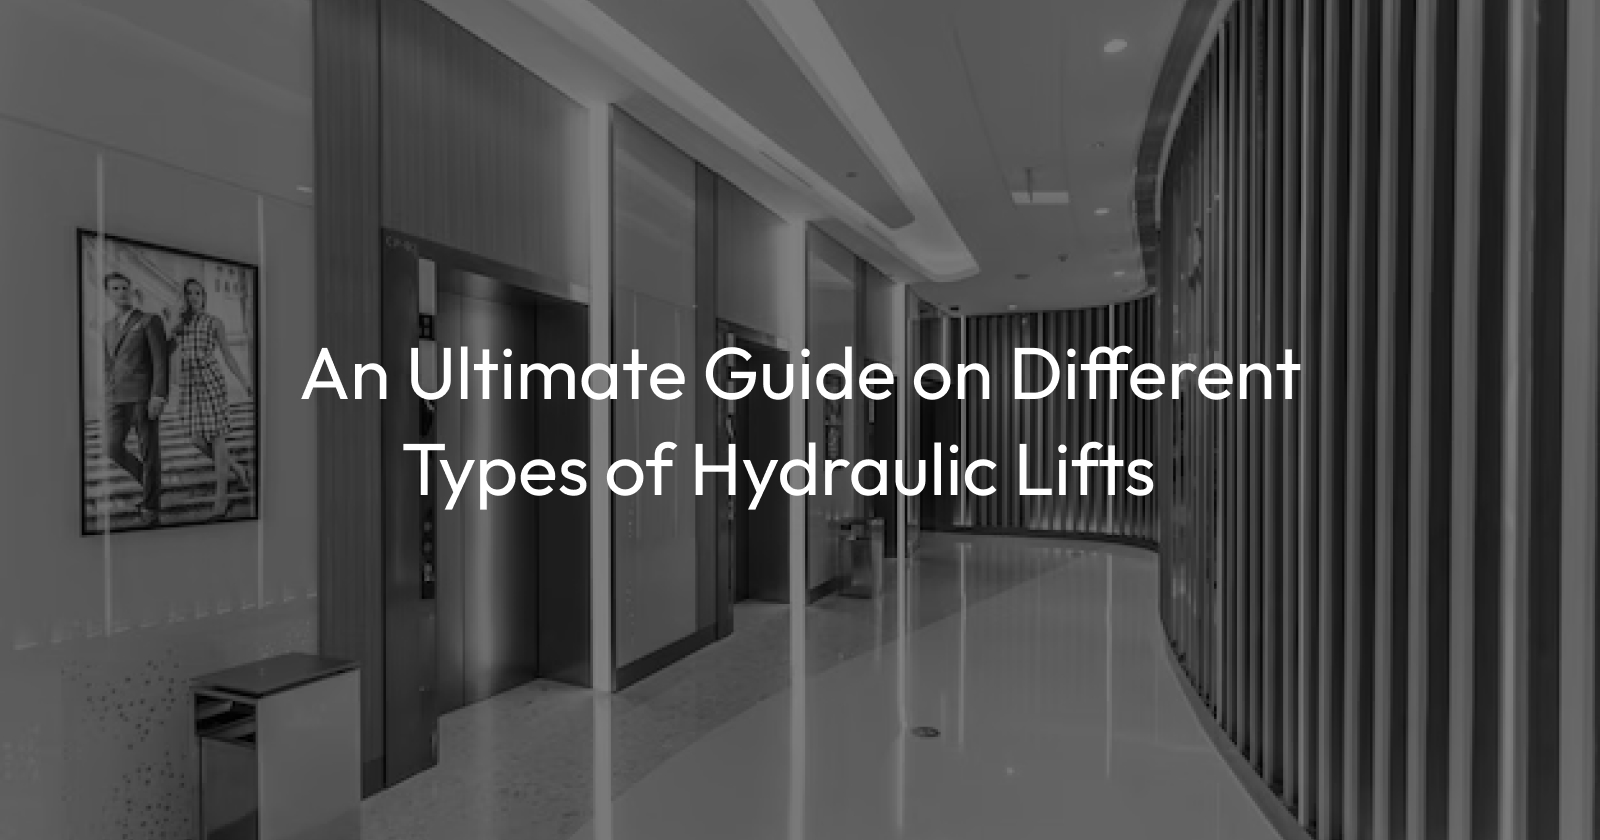 An Ultimate Guide on Different Types of Hydraulic Lifts